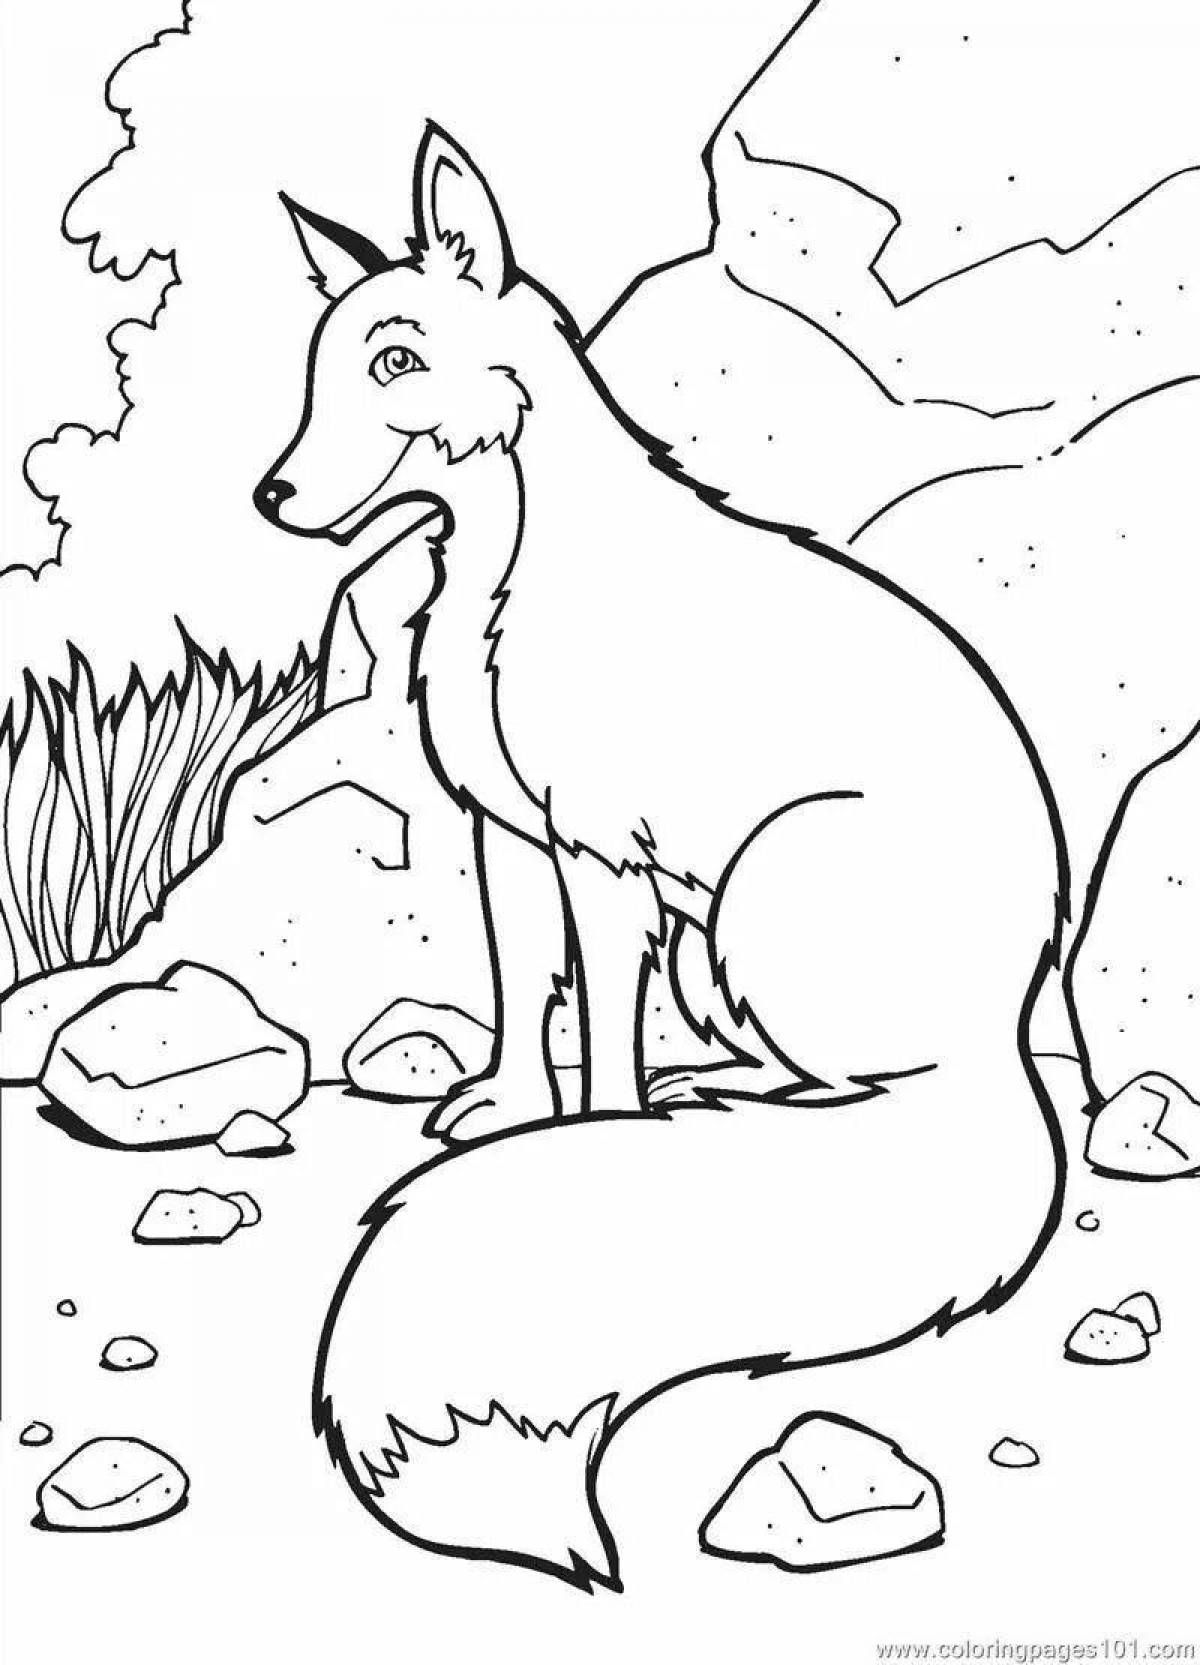 Live coloring fox in the forest